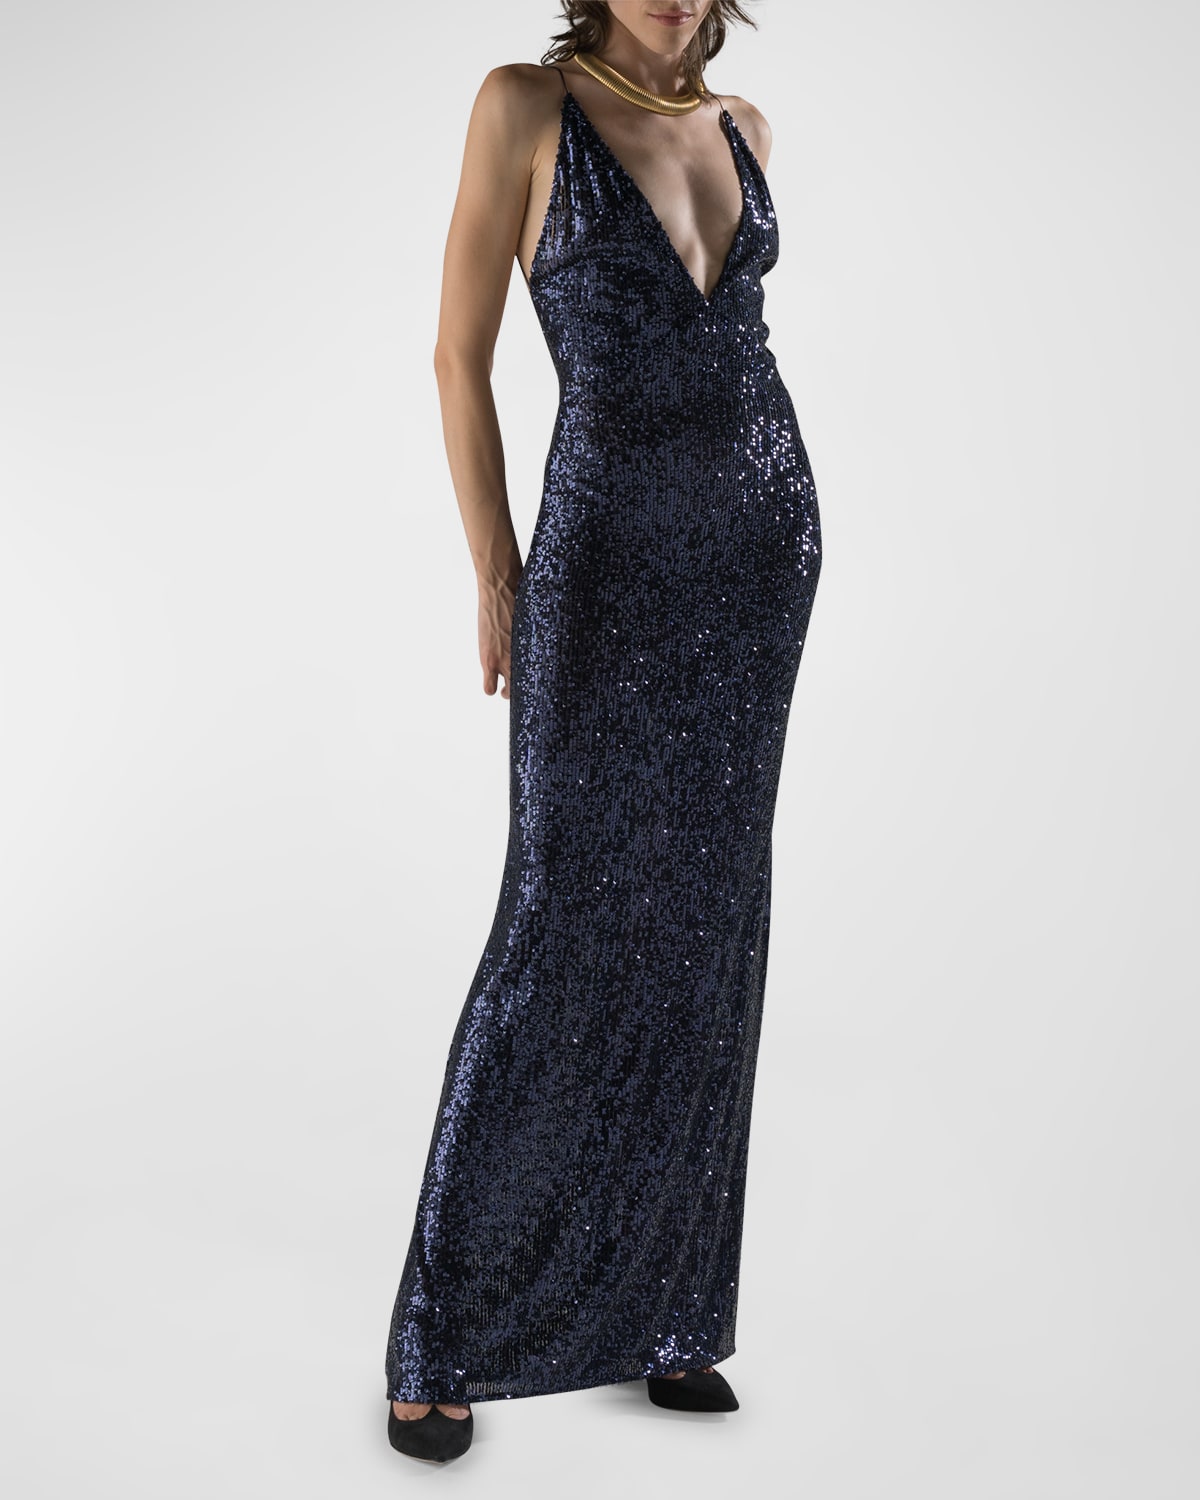 Megan Plunging Open-Back Sequin Gown